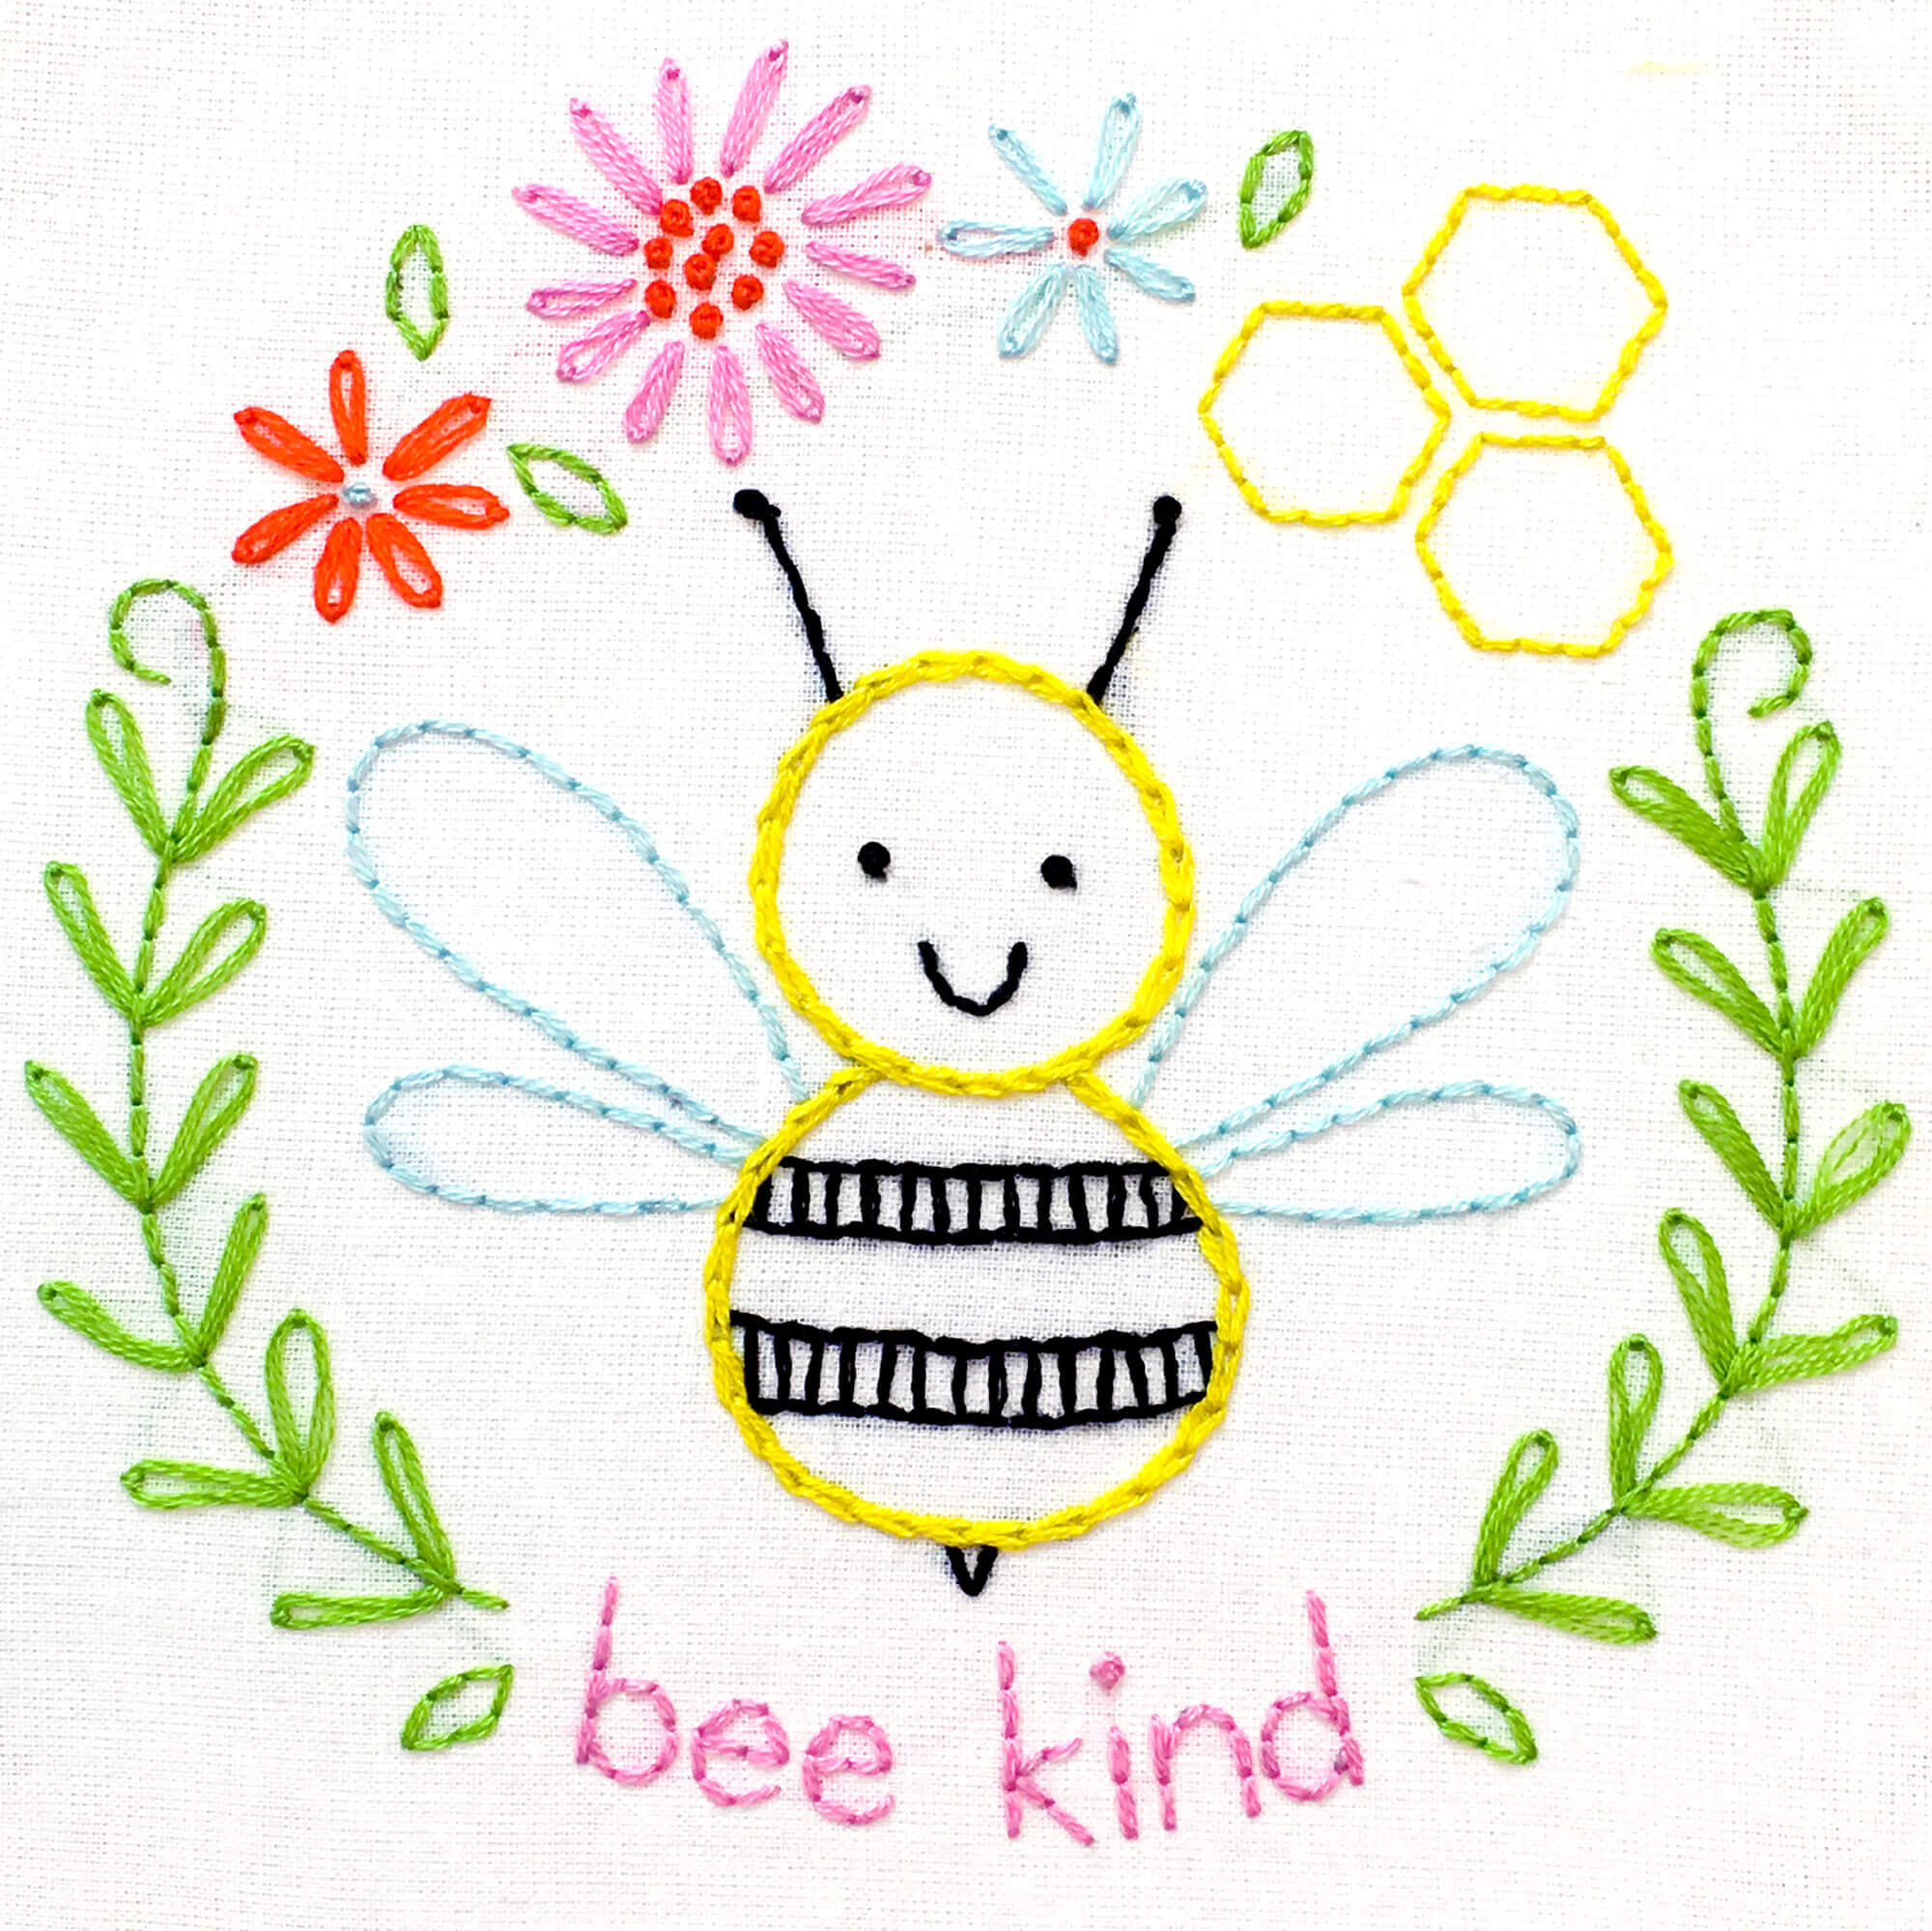 Bee Kind Bumblebee embroidery pattern